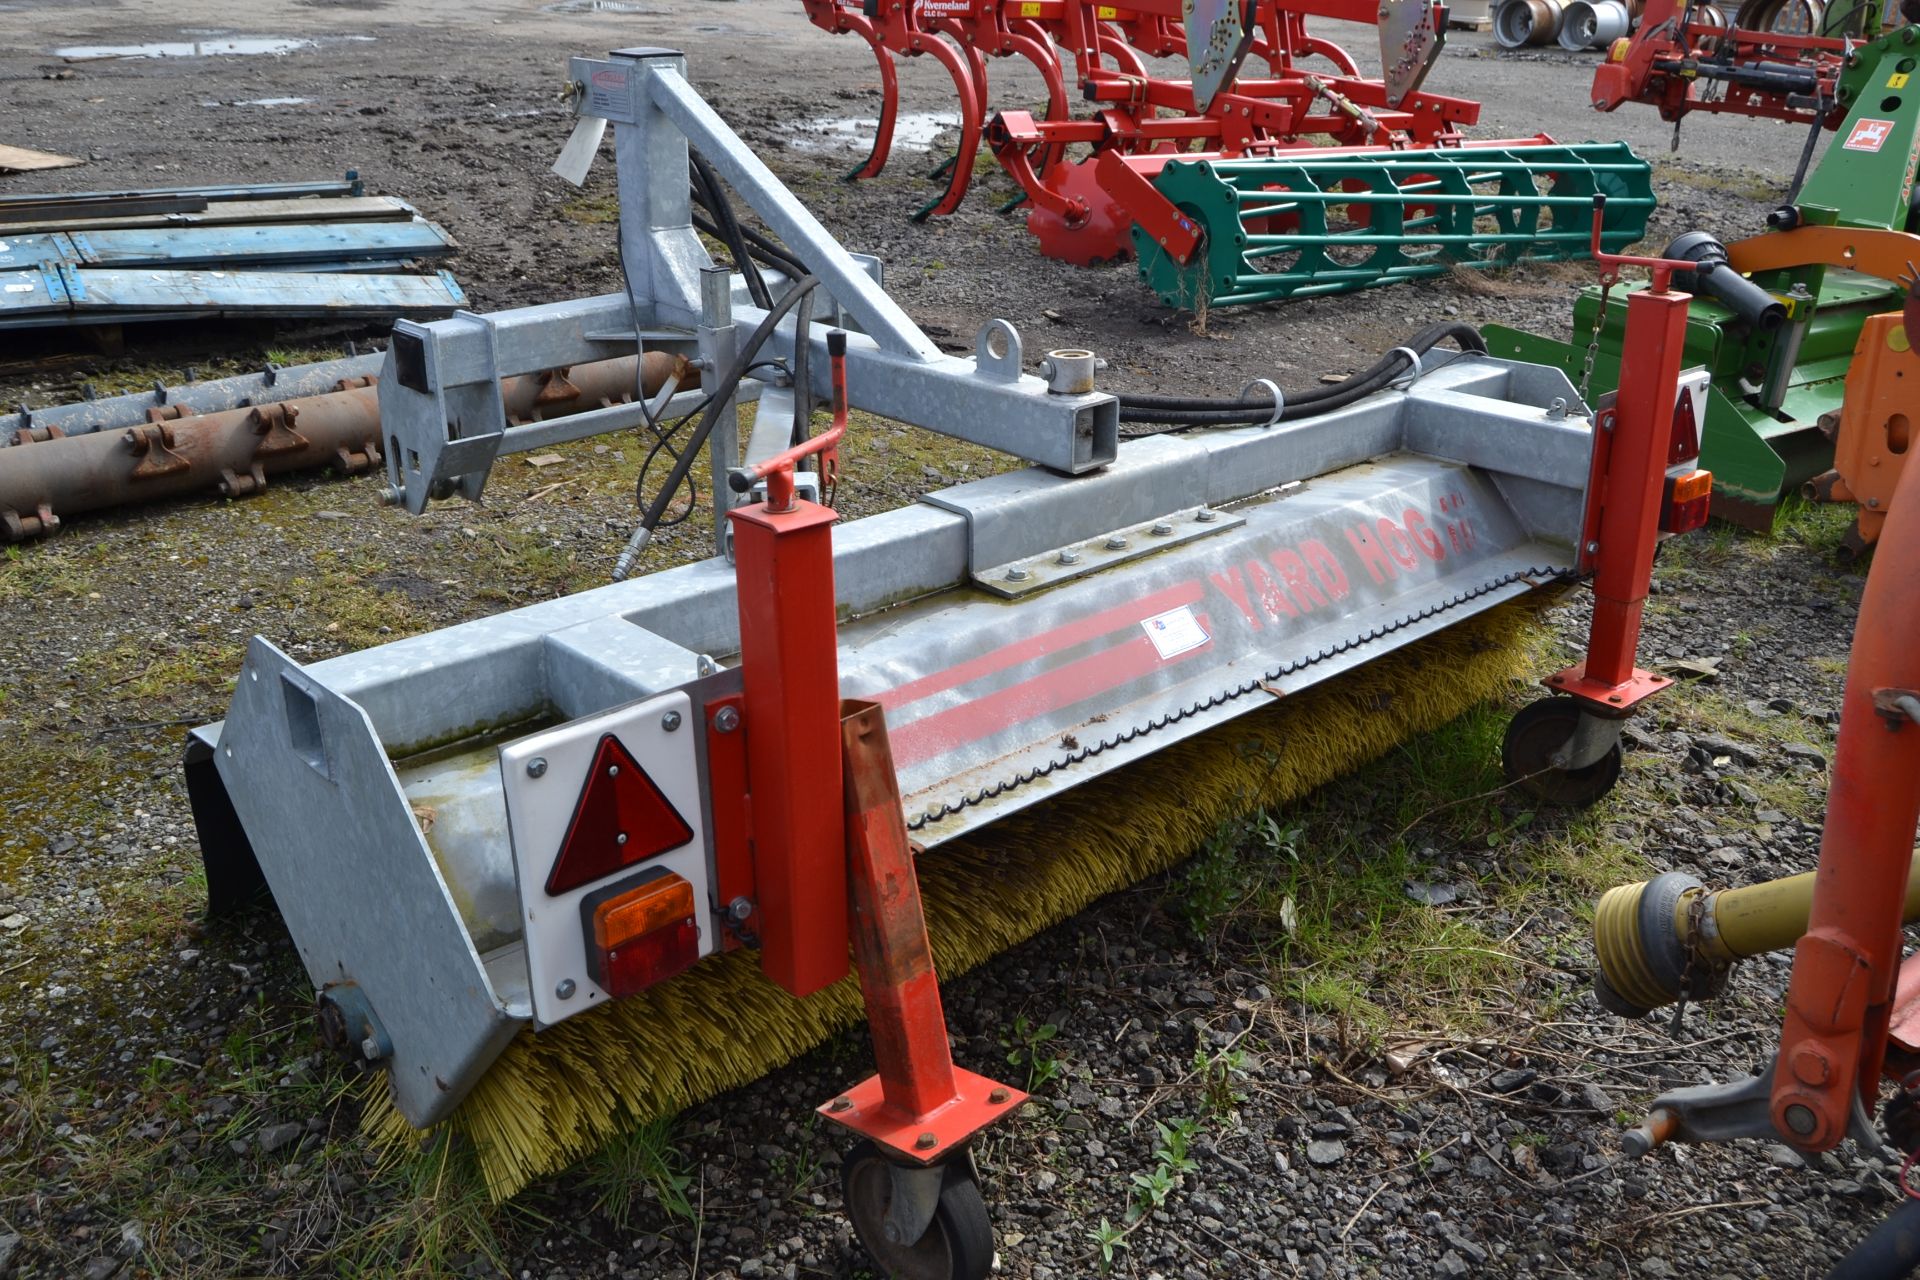 Latham YARD HOG SWEEPING ATTACHMENT, serial no. LAYHC131010 - Image 2 of 2